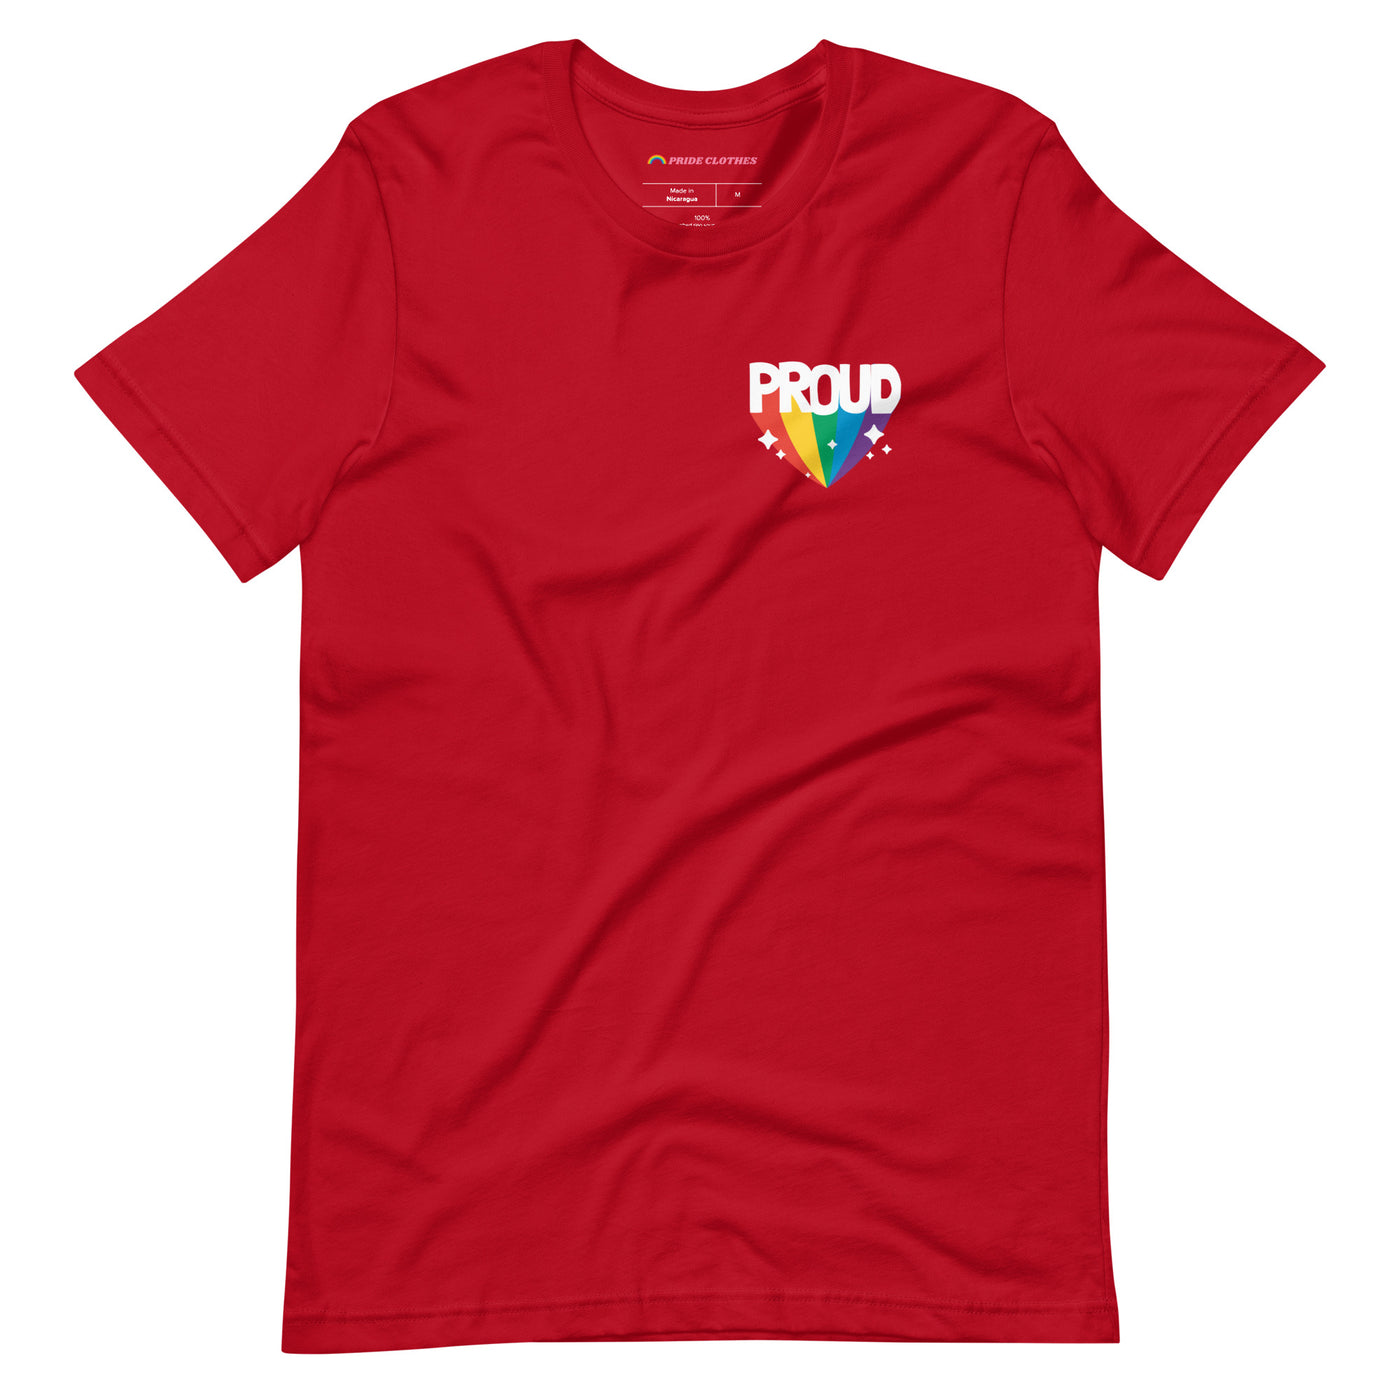 Pride Clothes - Proud of My True Rainbow Colors Gay Pride T-Shirt - Red